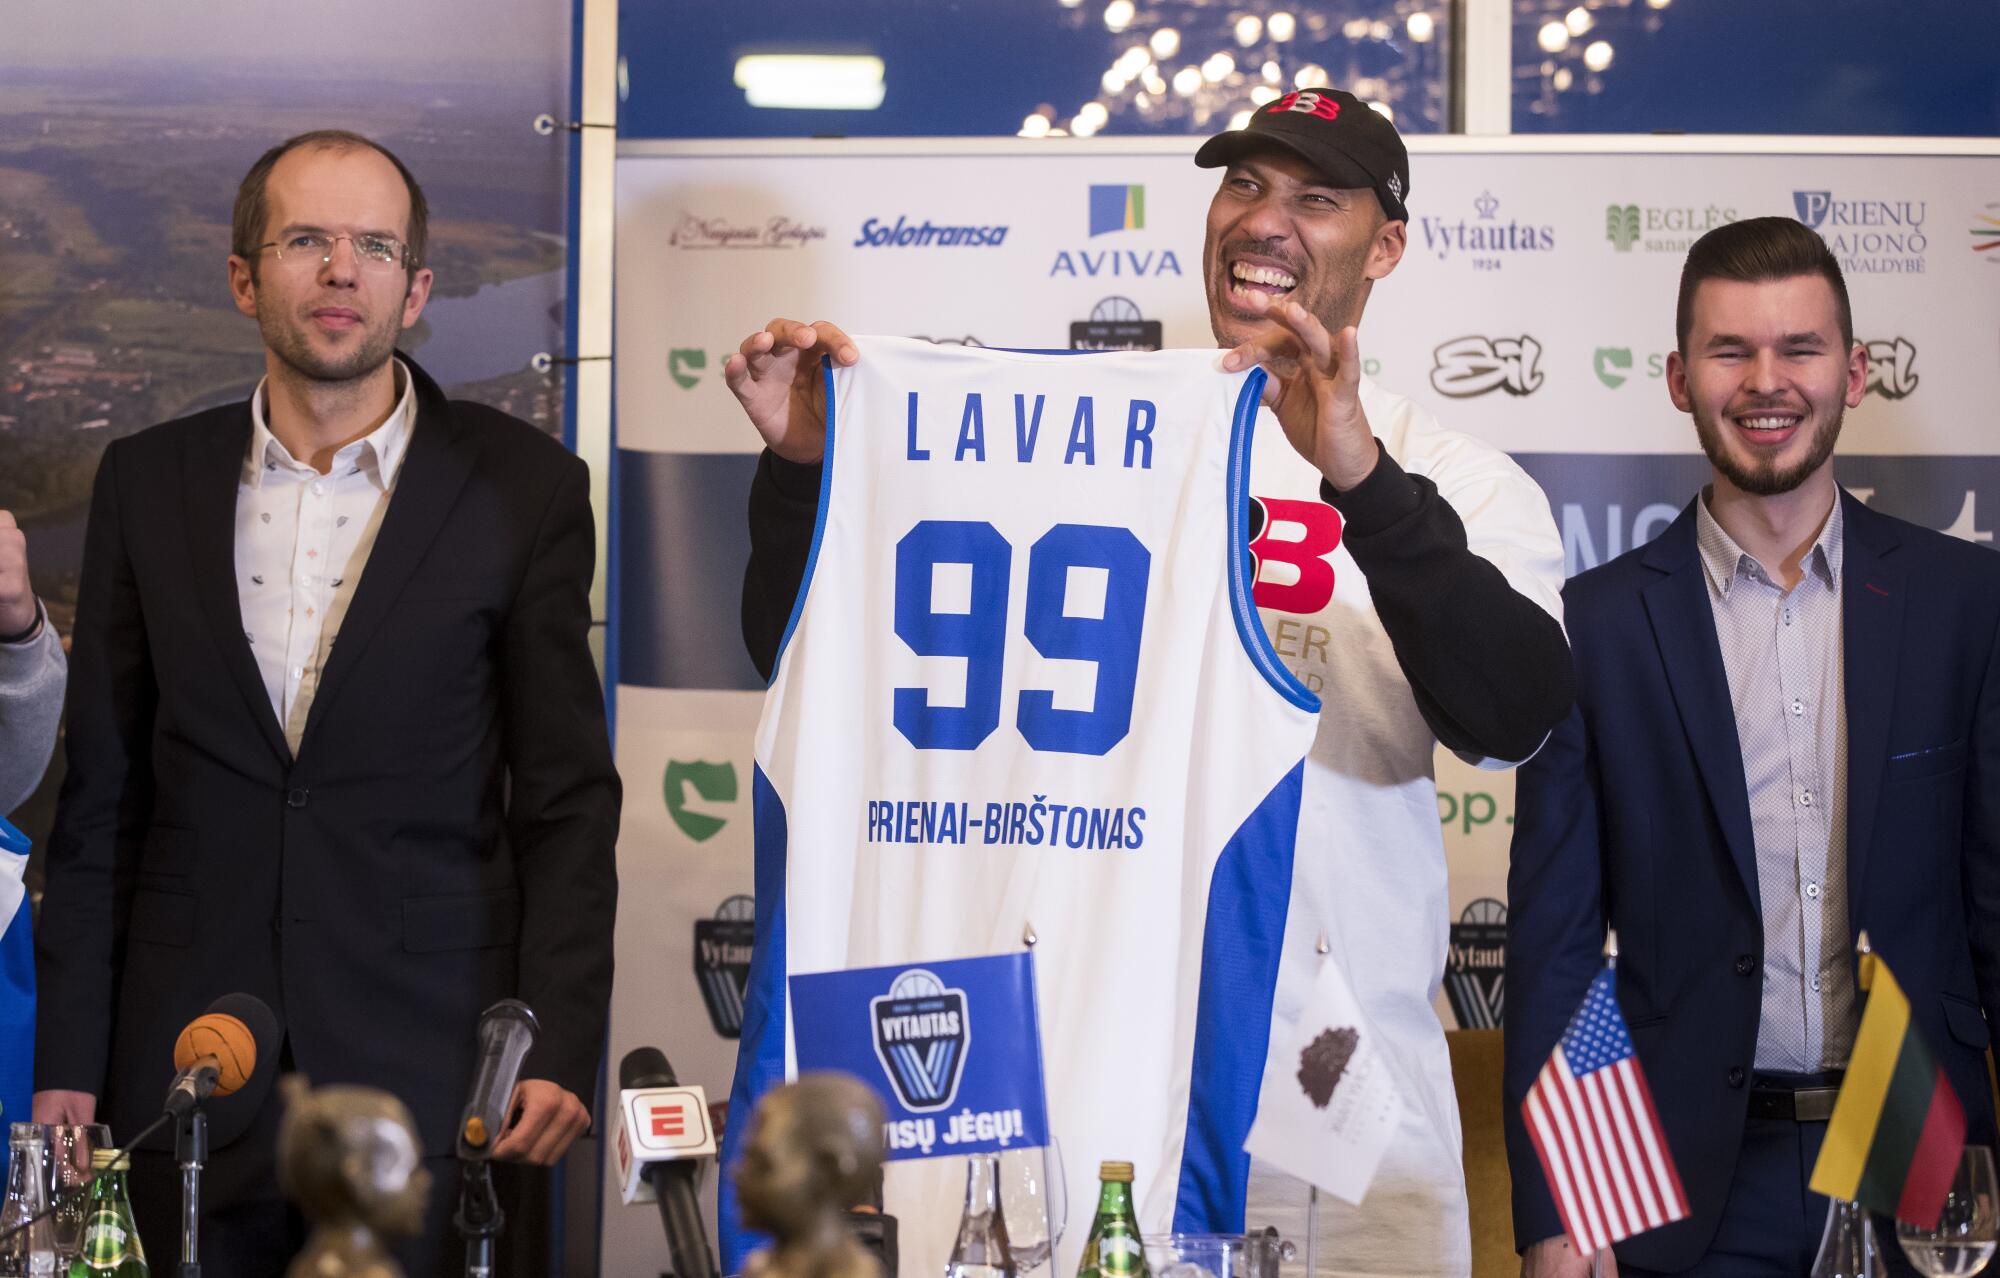 LaVar Ball holds up a Lytautas Prienai jersey during a news conference in Lithunia.